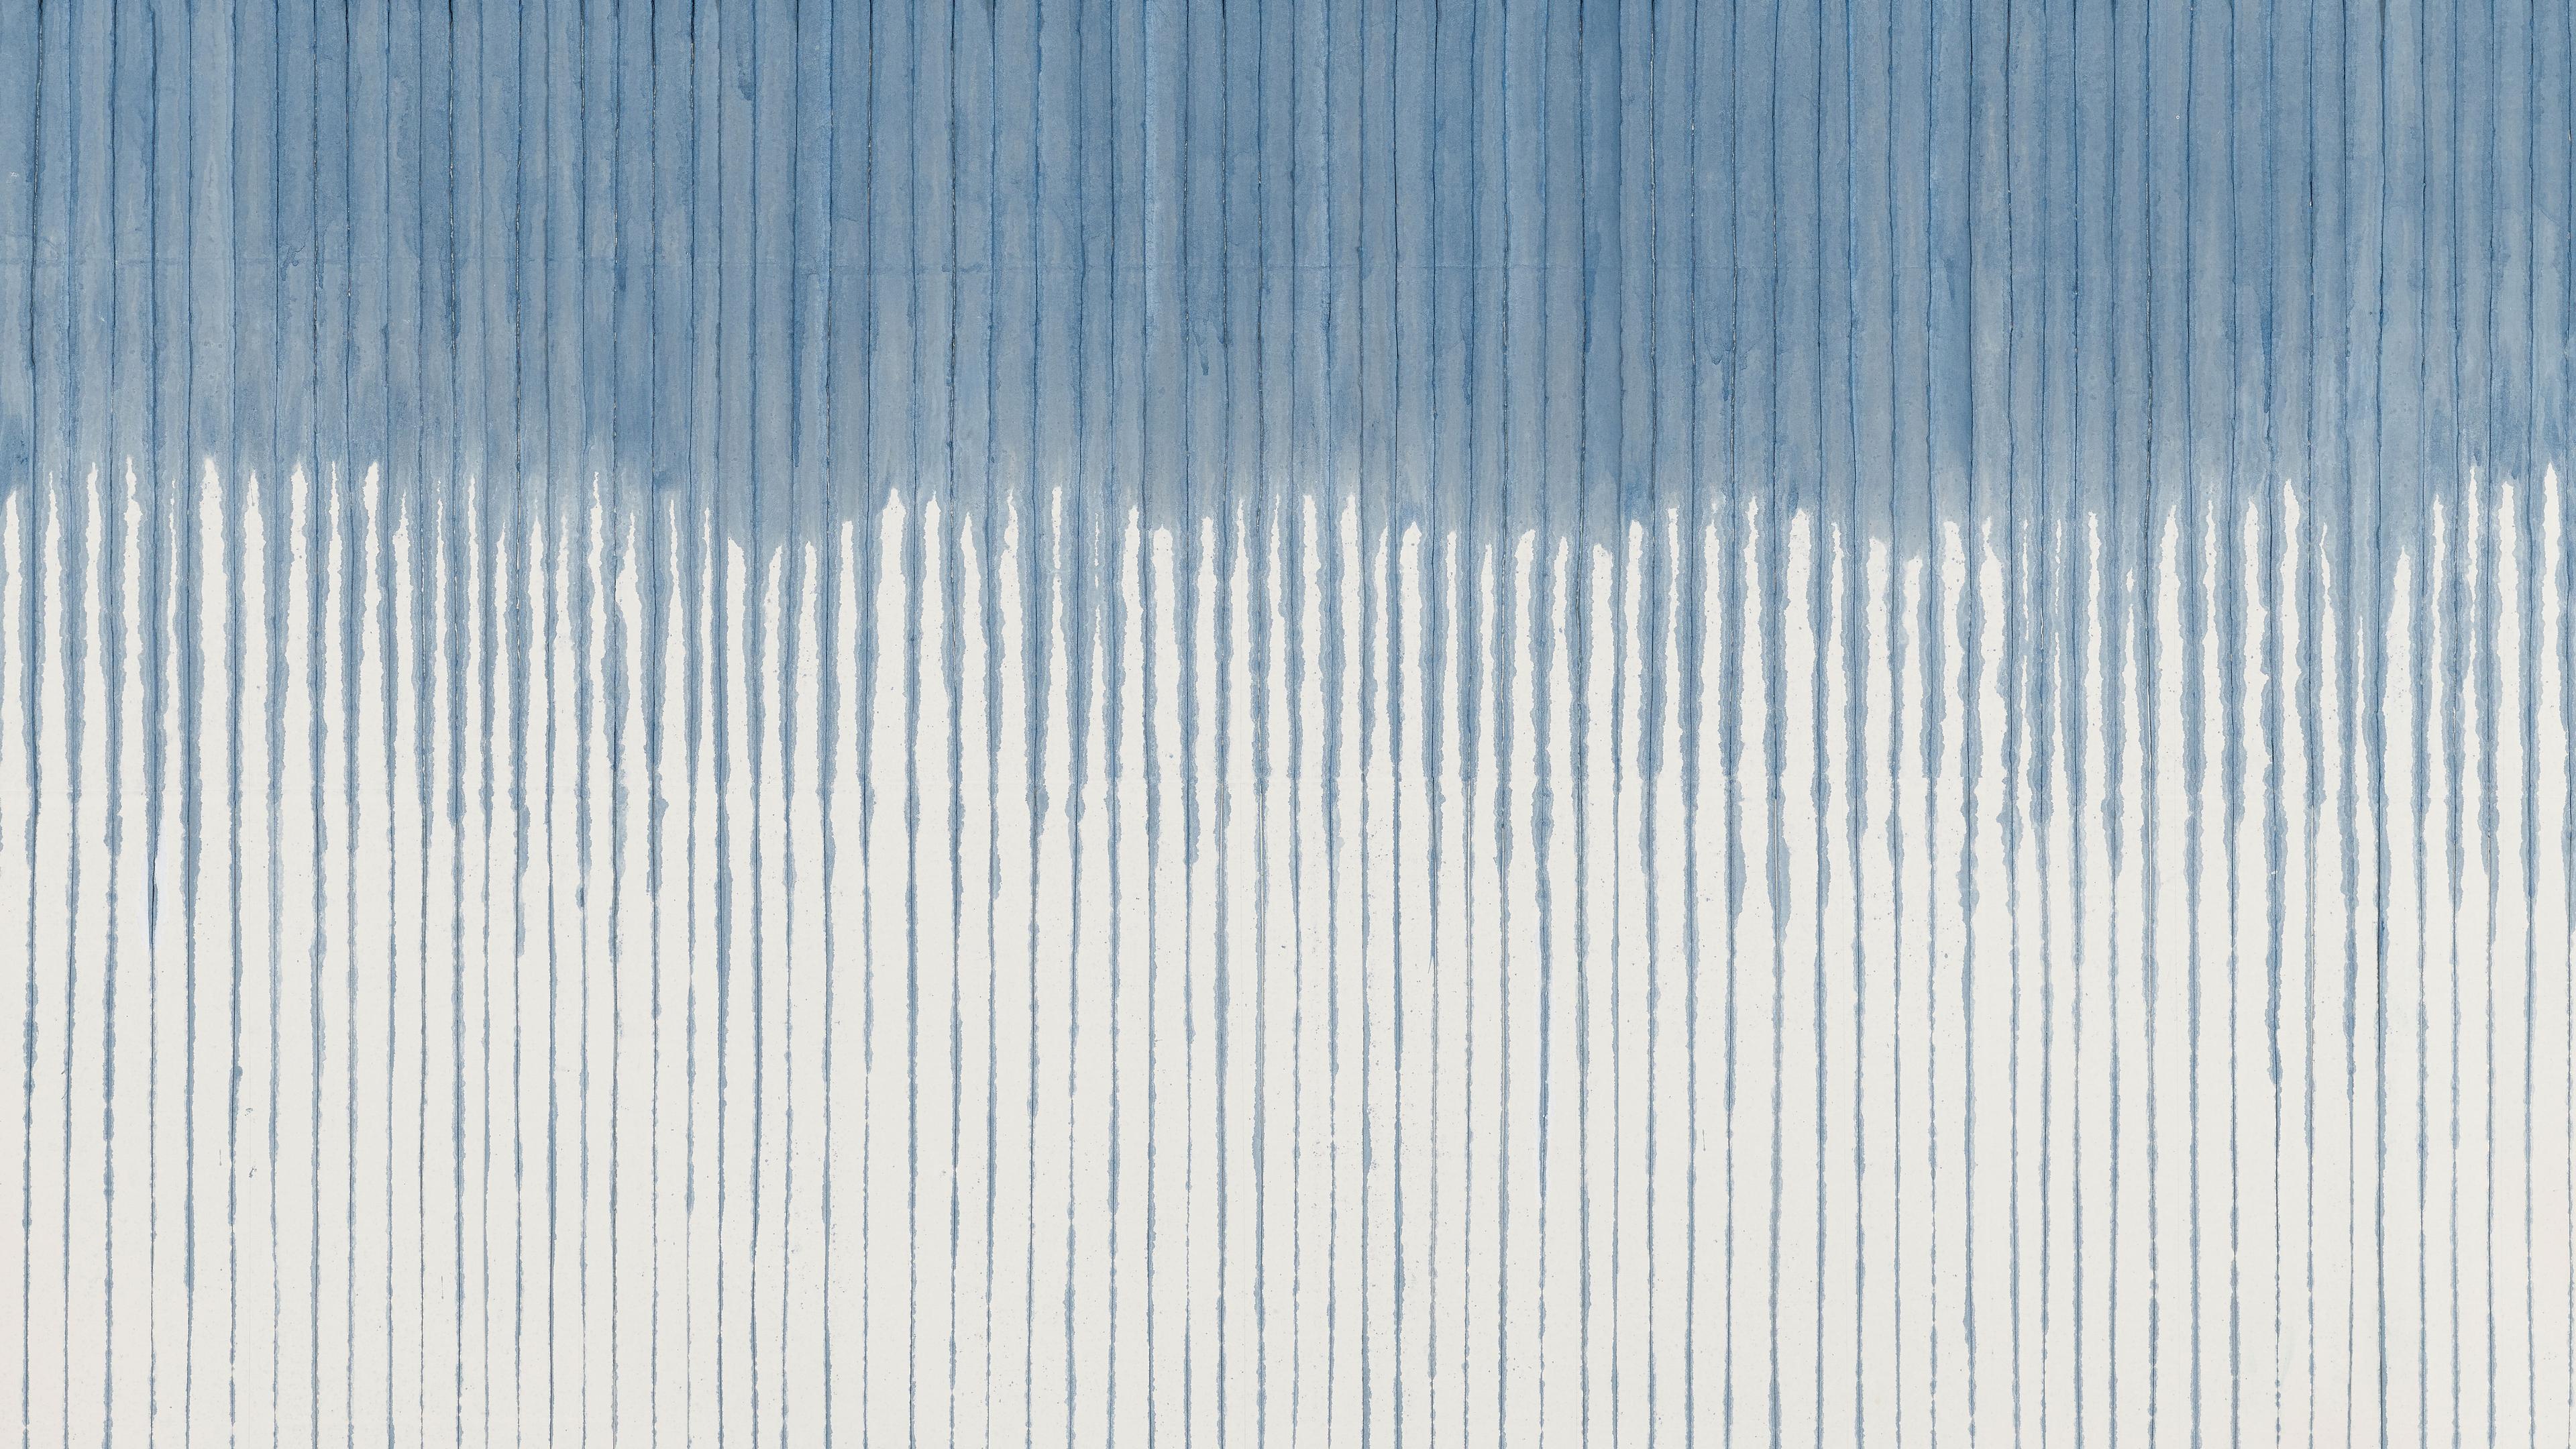 A large white canvas with dripping, vertical indigo lines spaced closely together. The indigo color is concentrated at the top of the canvas then trails off as it makes its way down.